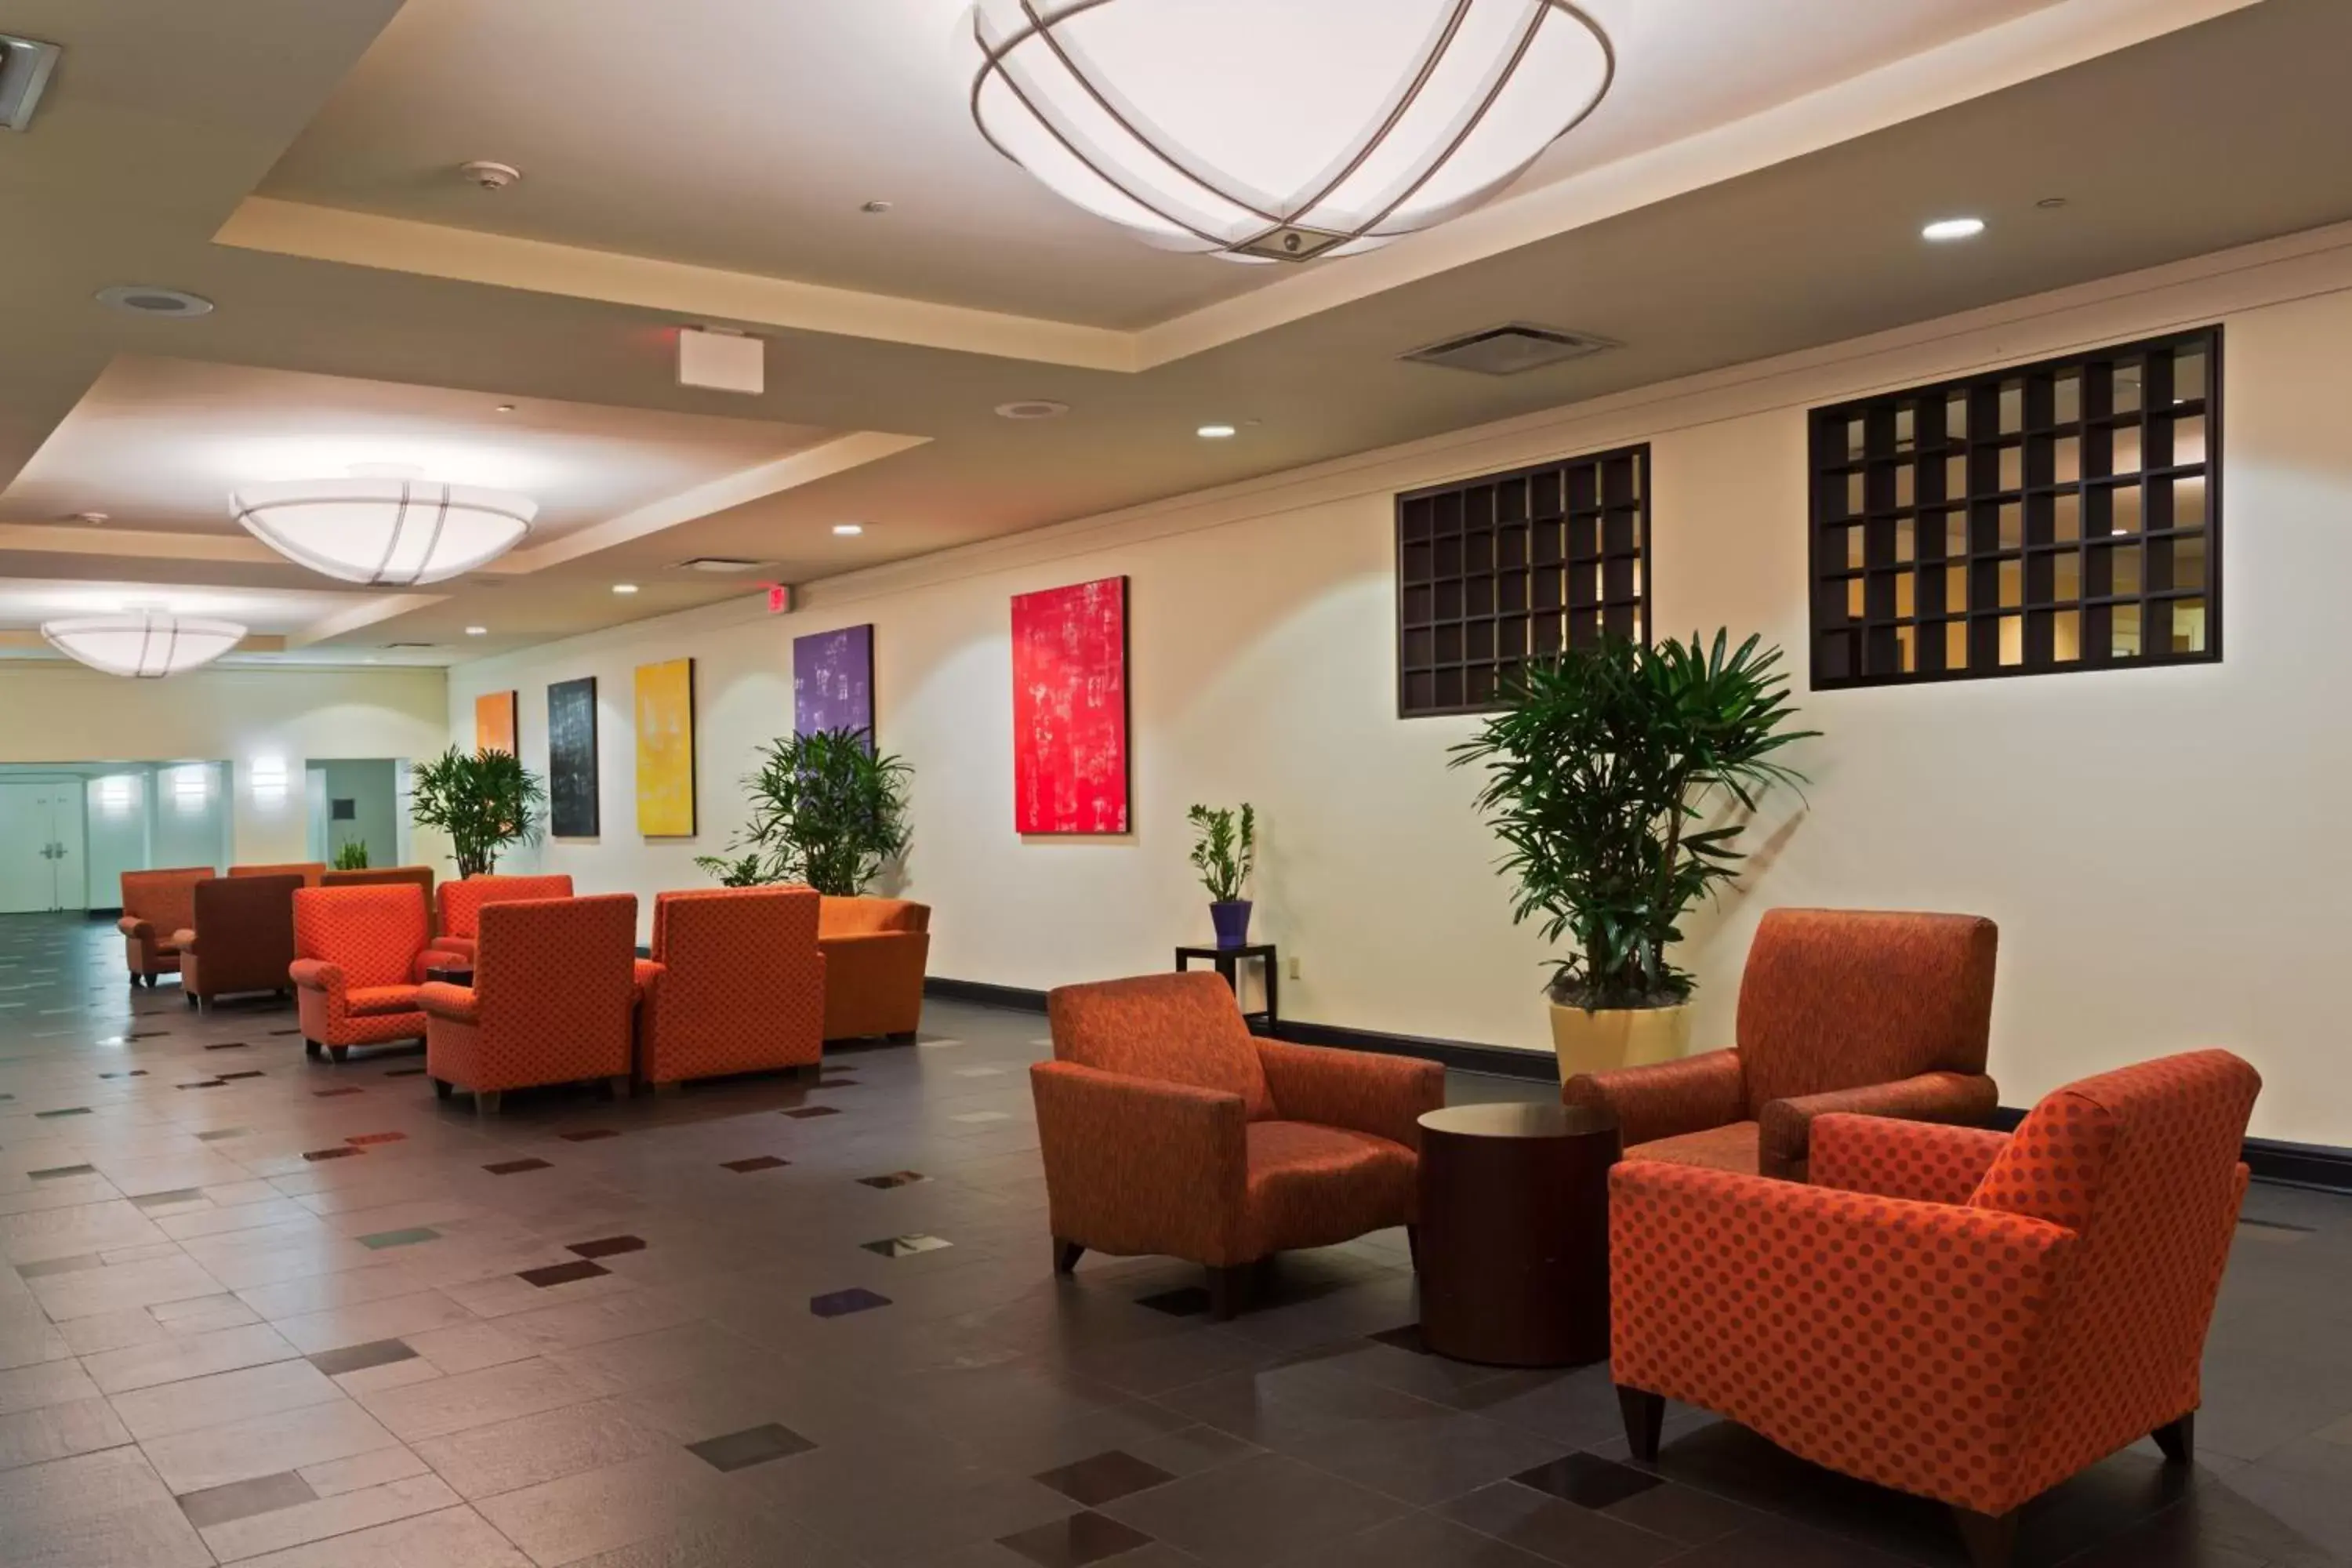 Meeting/conference room, Lobby/Reception in Clarion Hotel New Orleans - Airport & Conference Center